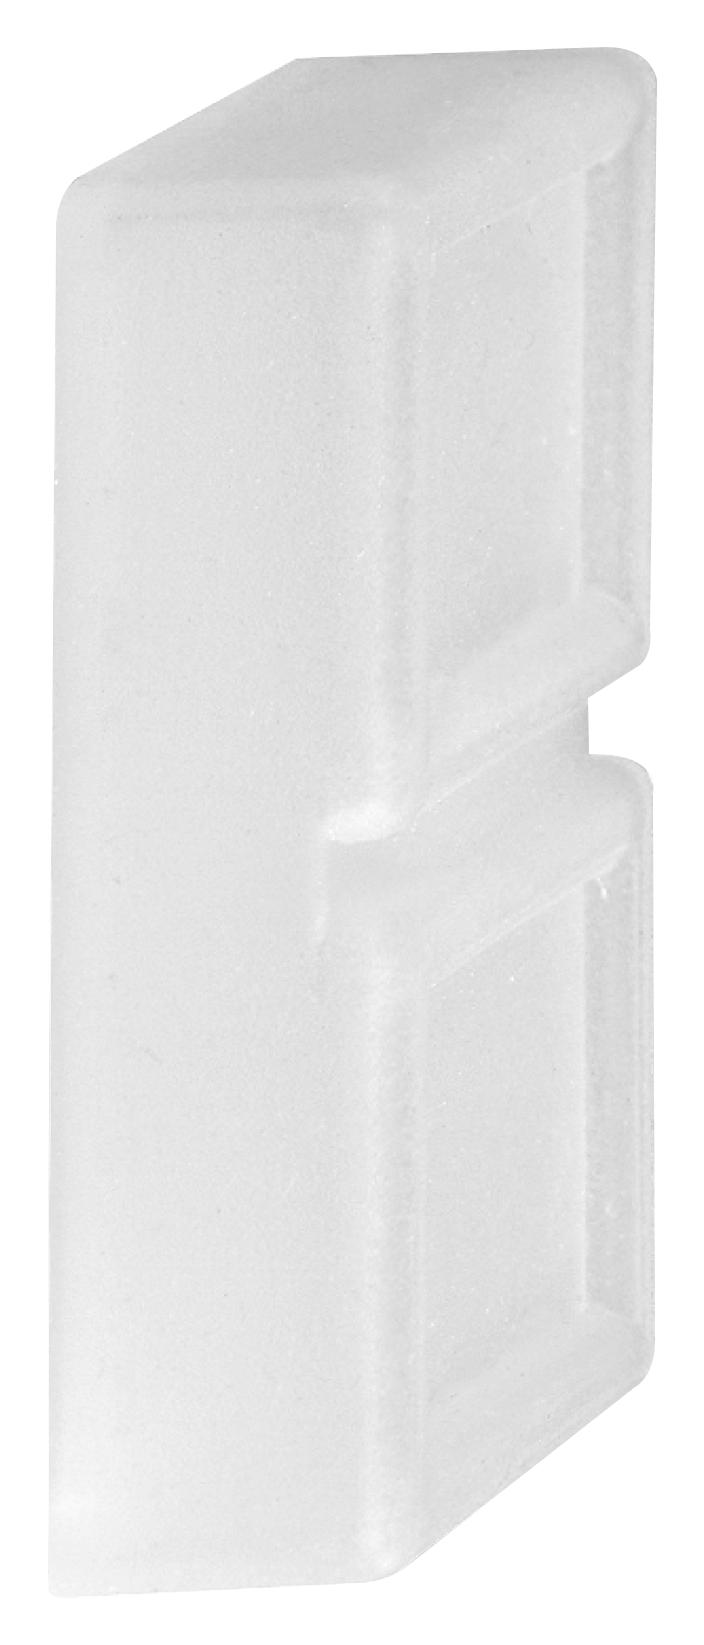 SCHNEIDER ELECTRIC Sealing Boots ZBW008 CLEAR BOOT, DOUBLE HEADED PUSH-BUTTON SCHNEIDER ELECTRIC 3109152 ZBW008